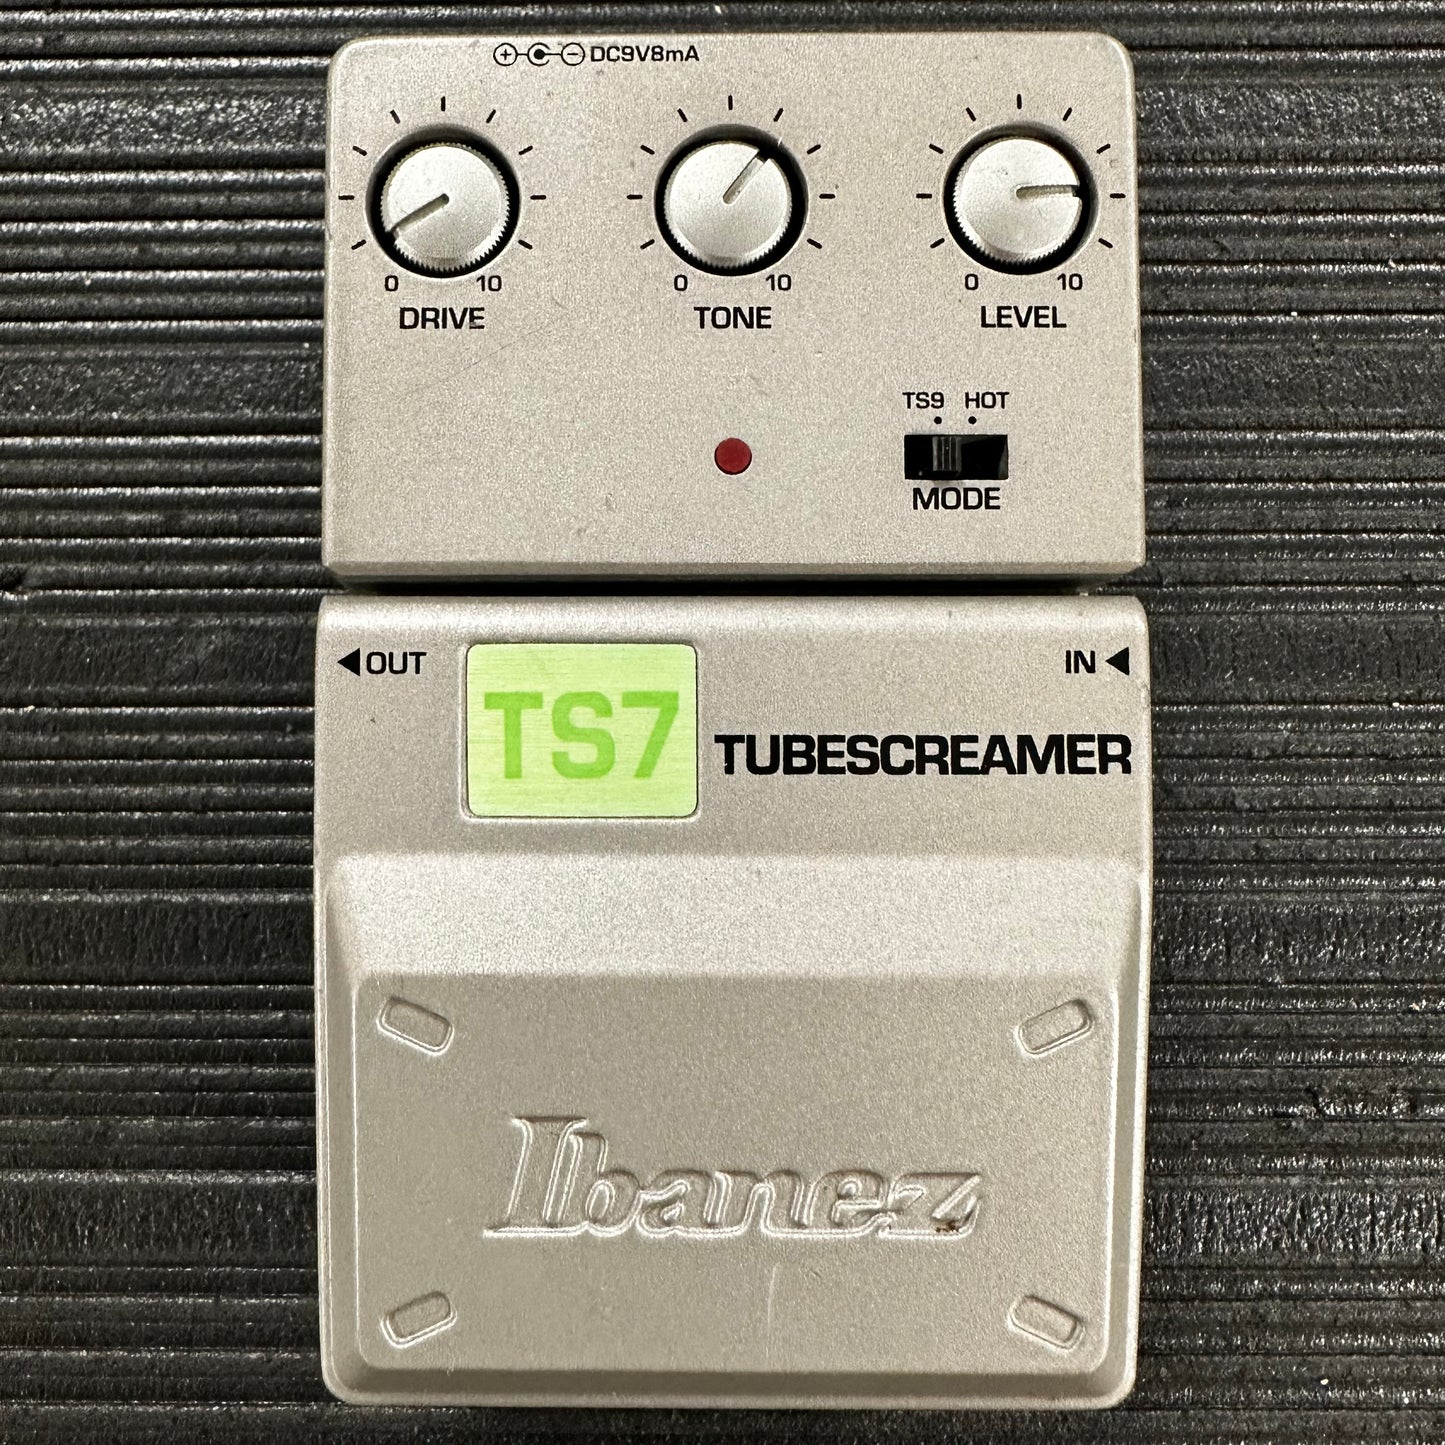 Top view of Used Ibanez TS7 Tube Screamer Overdrive Pedal w/Box 